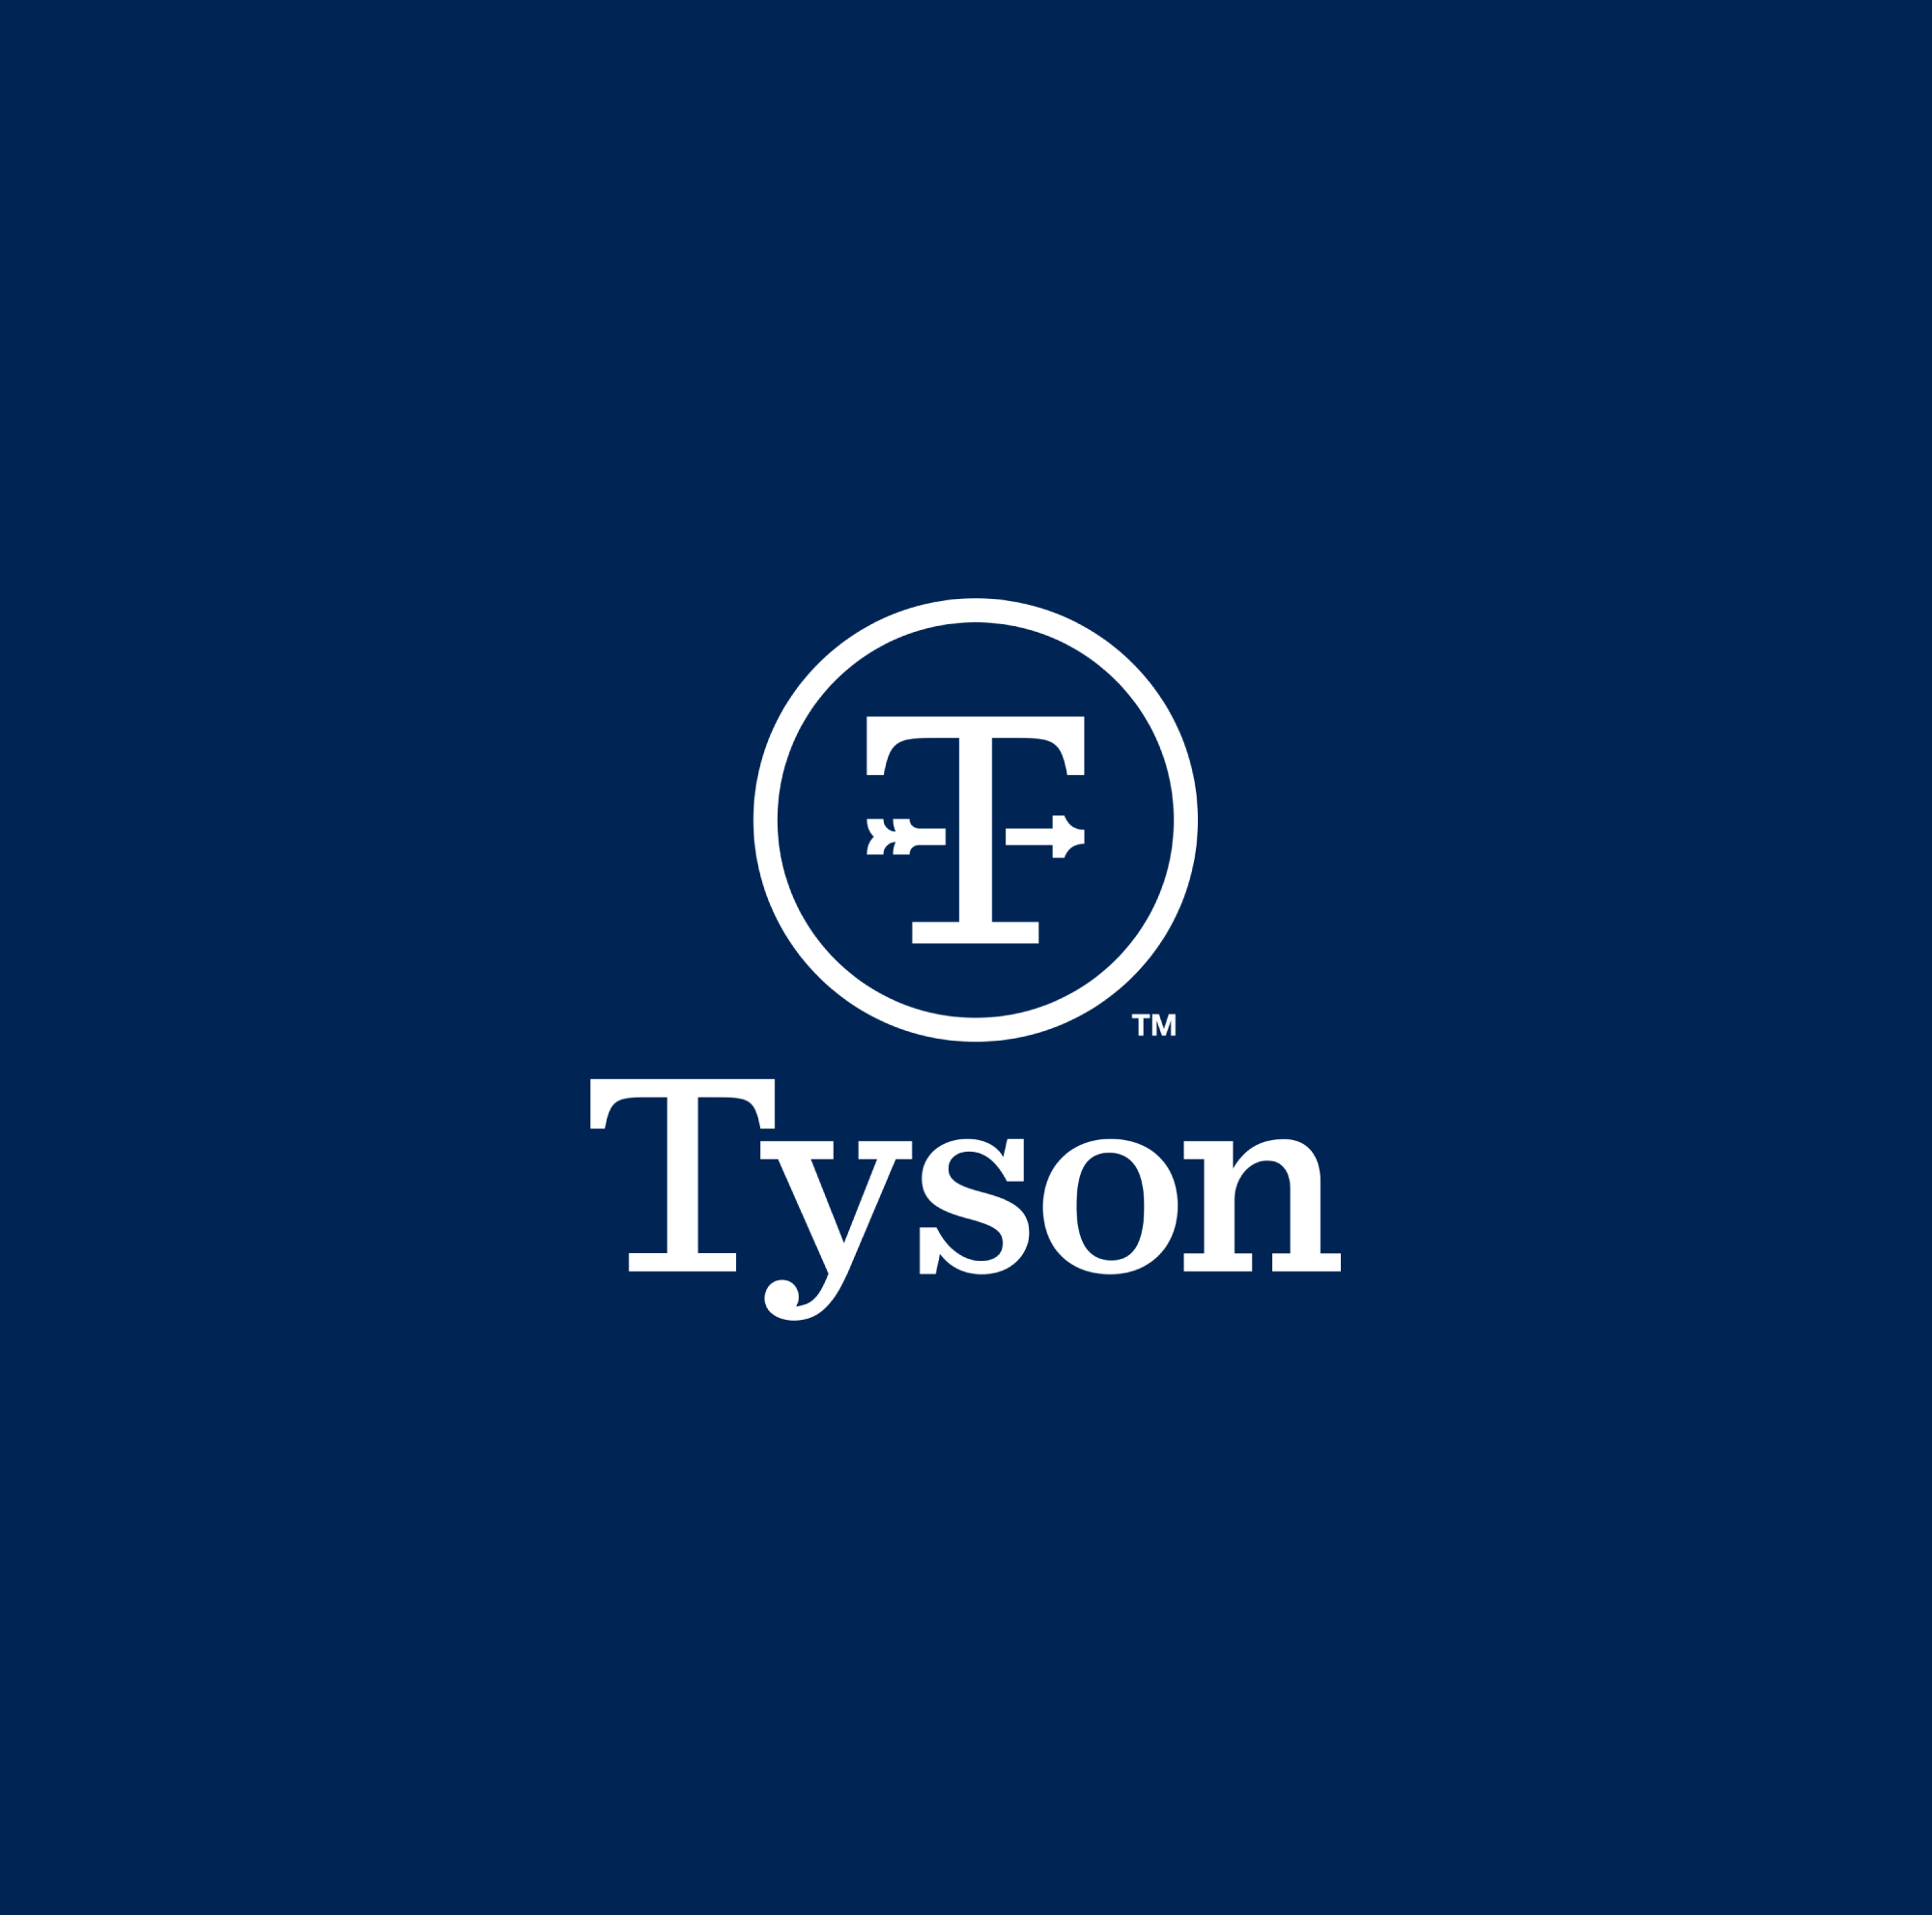 Tyson to close 4 chicken processing plants